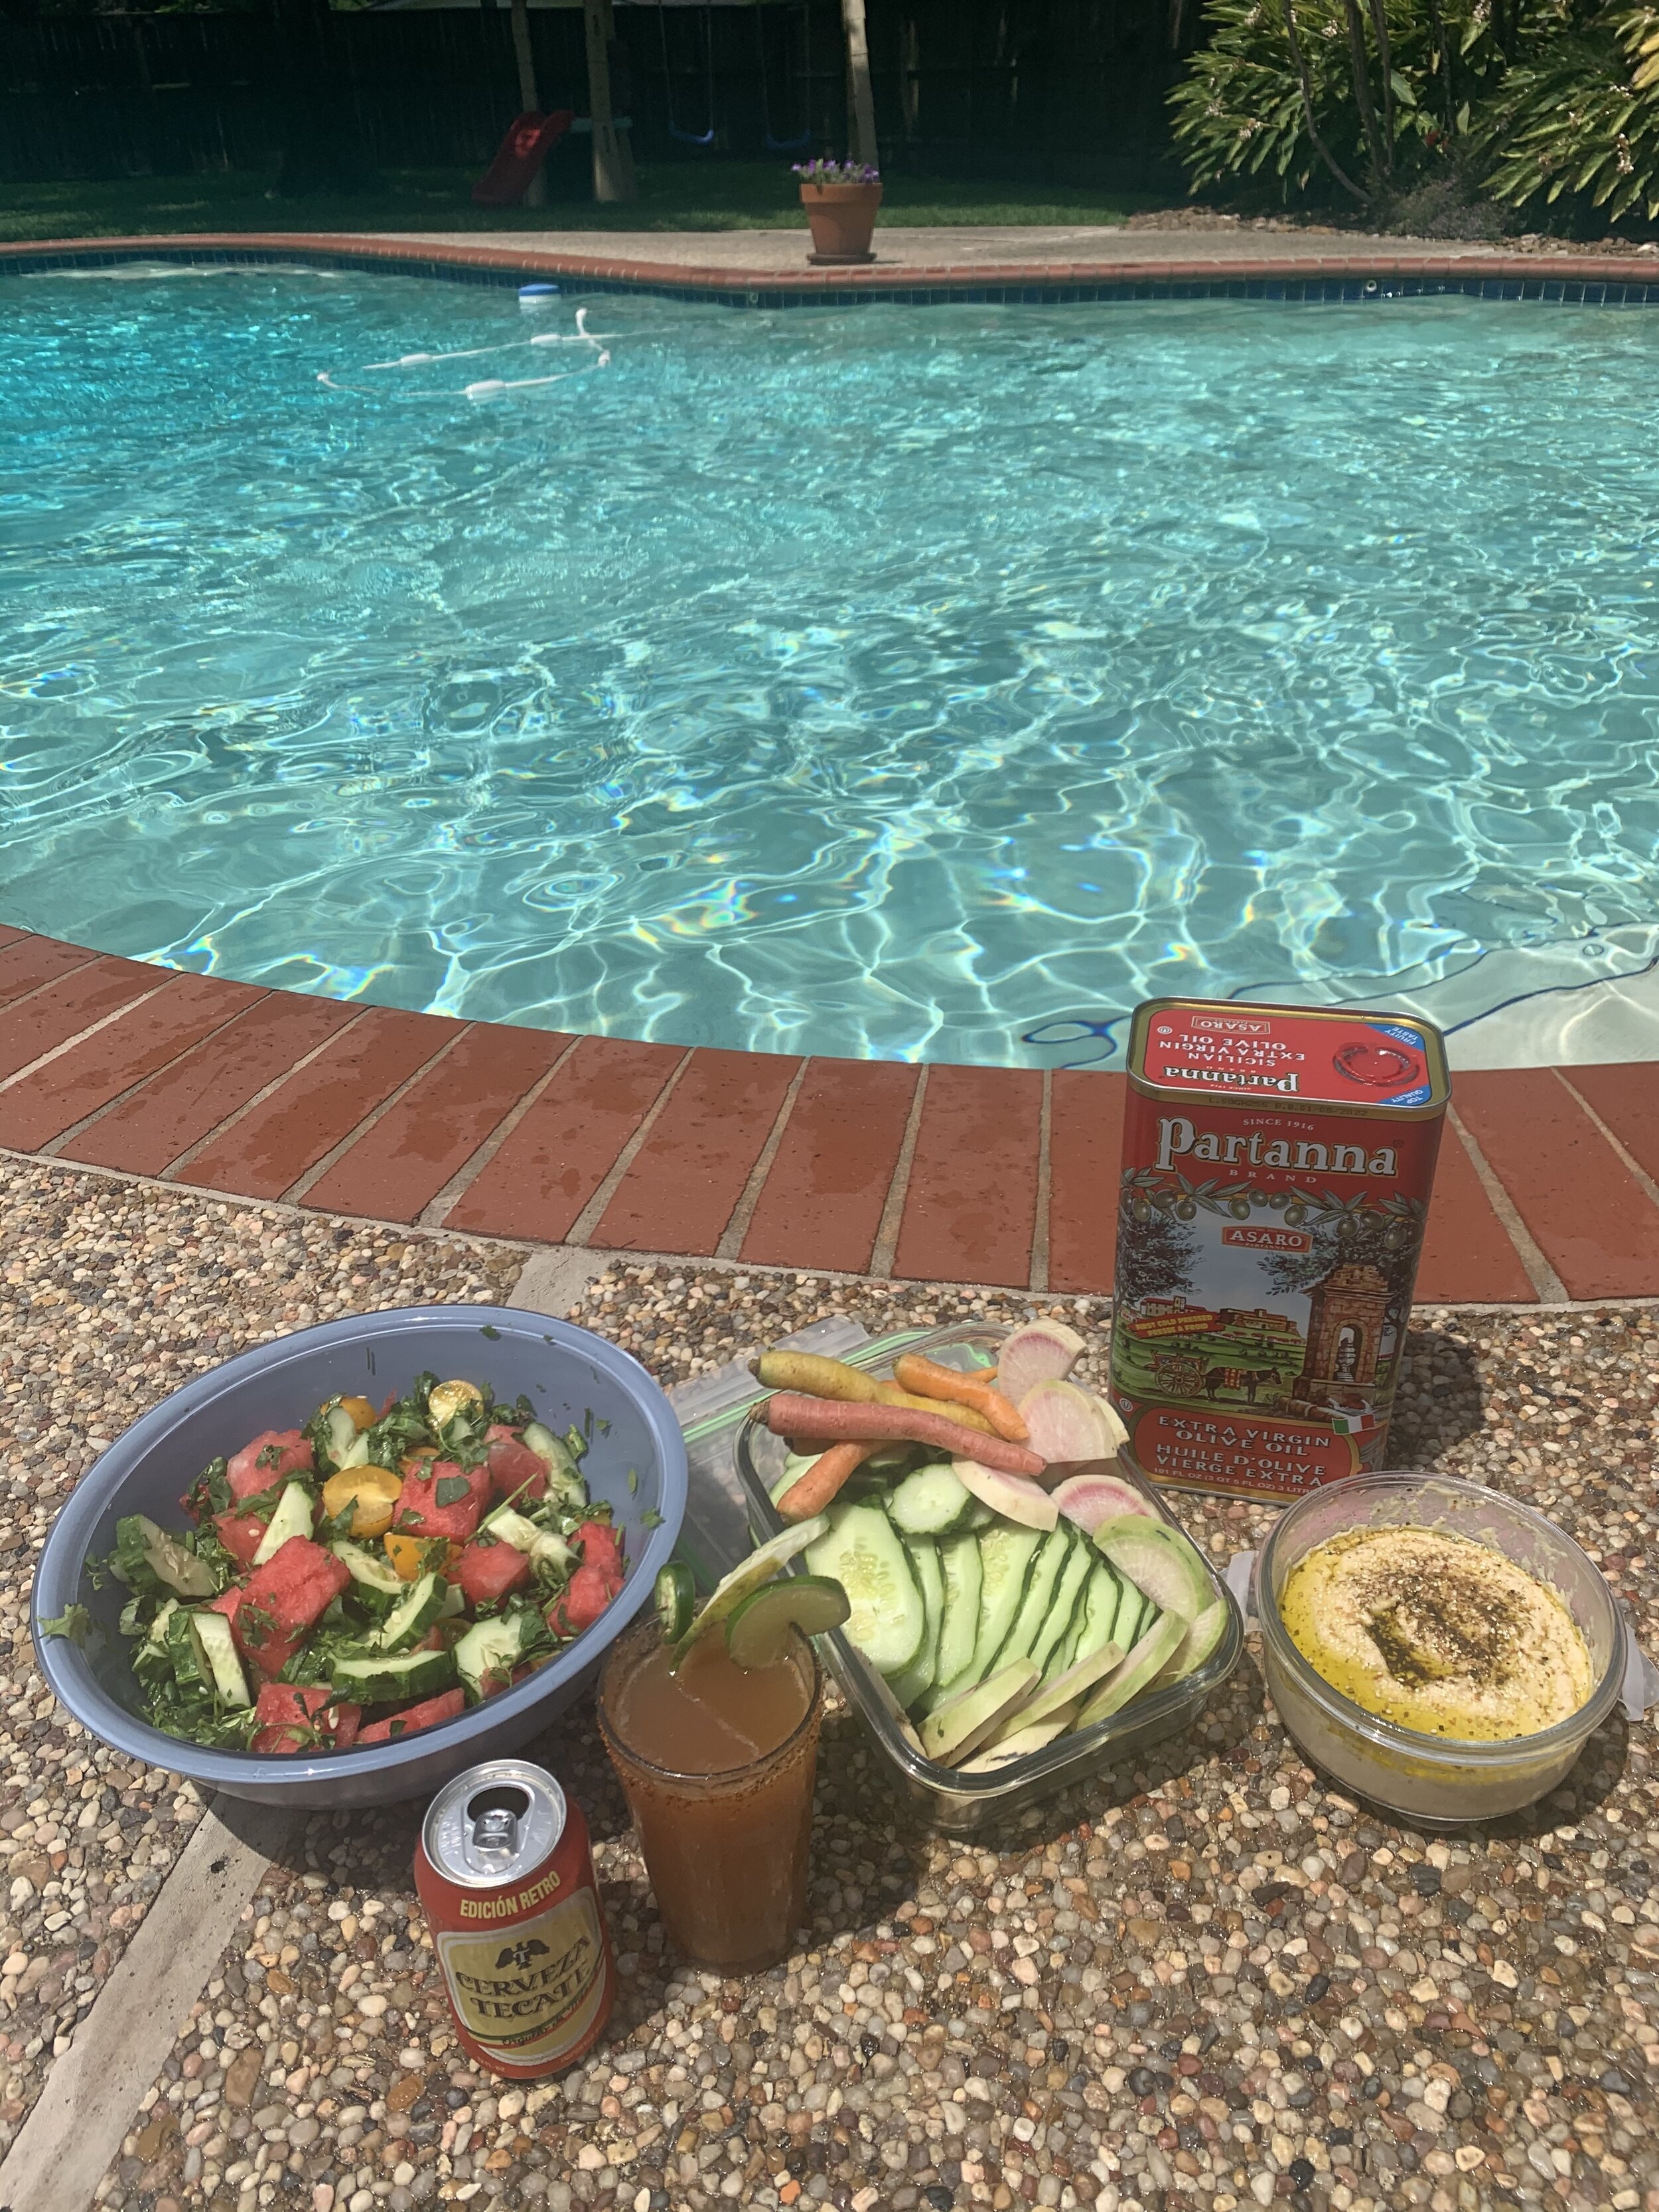 What a spread! Farmer Malone and her family love to snack during pool time.